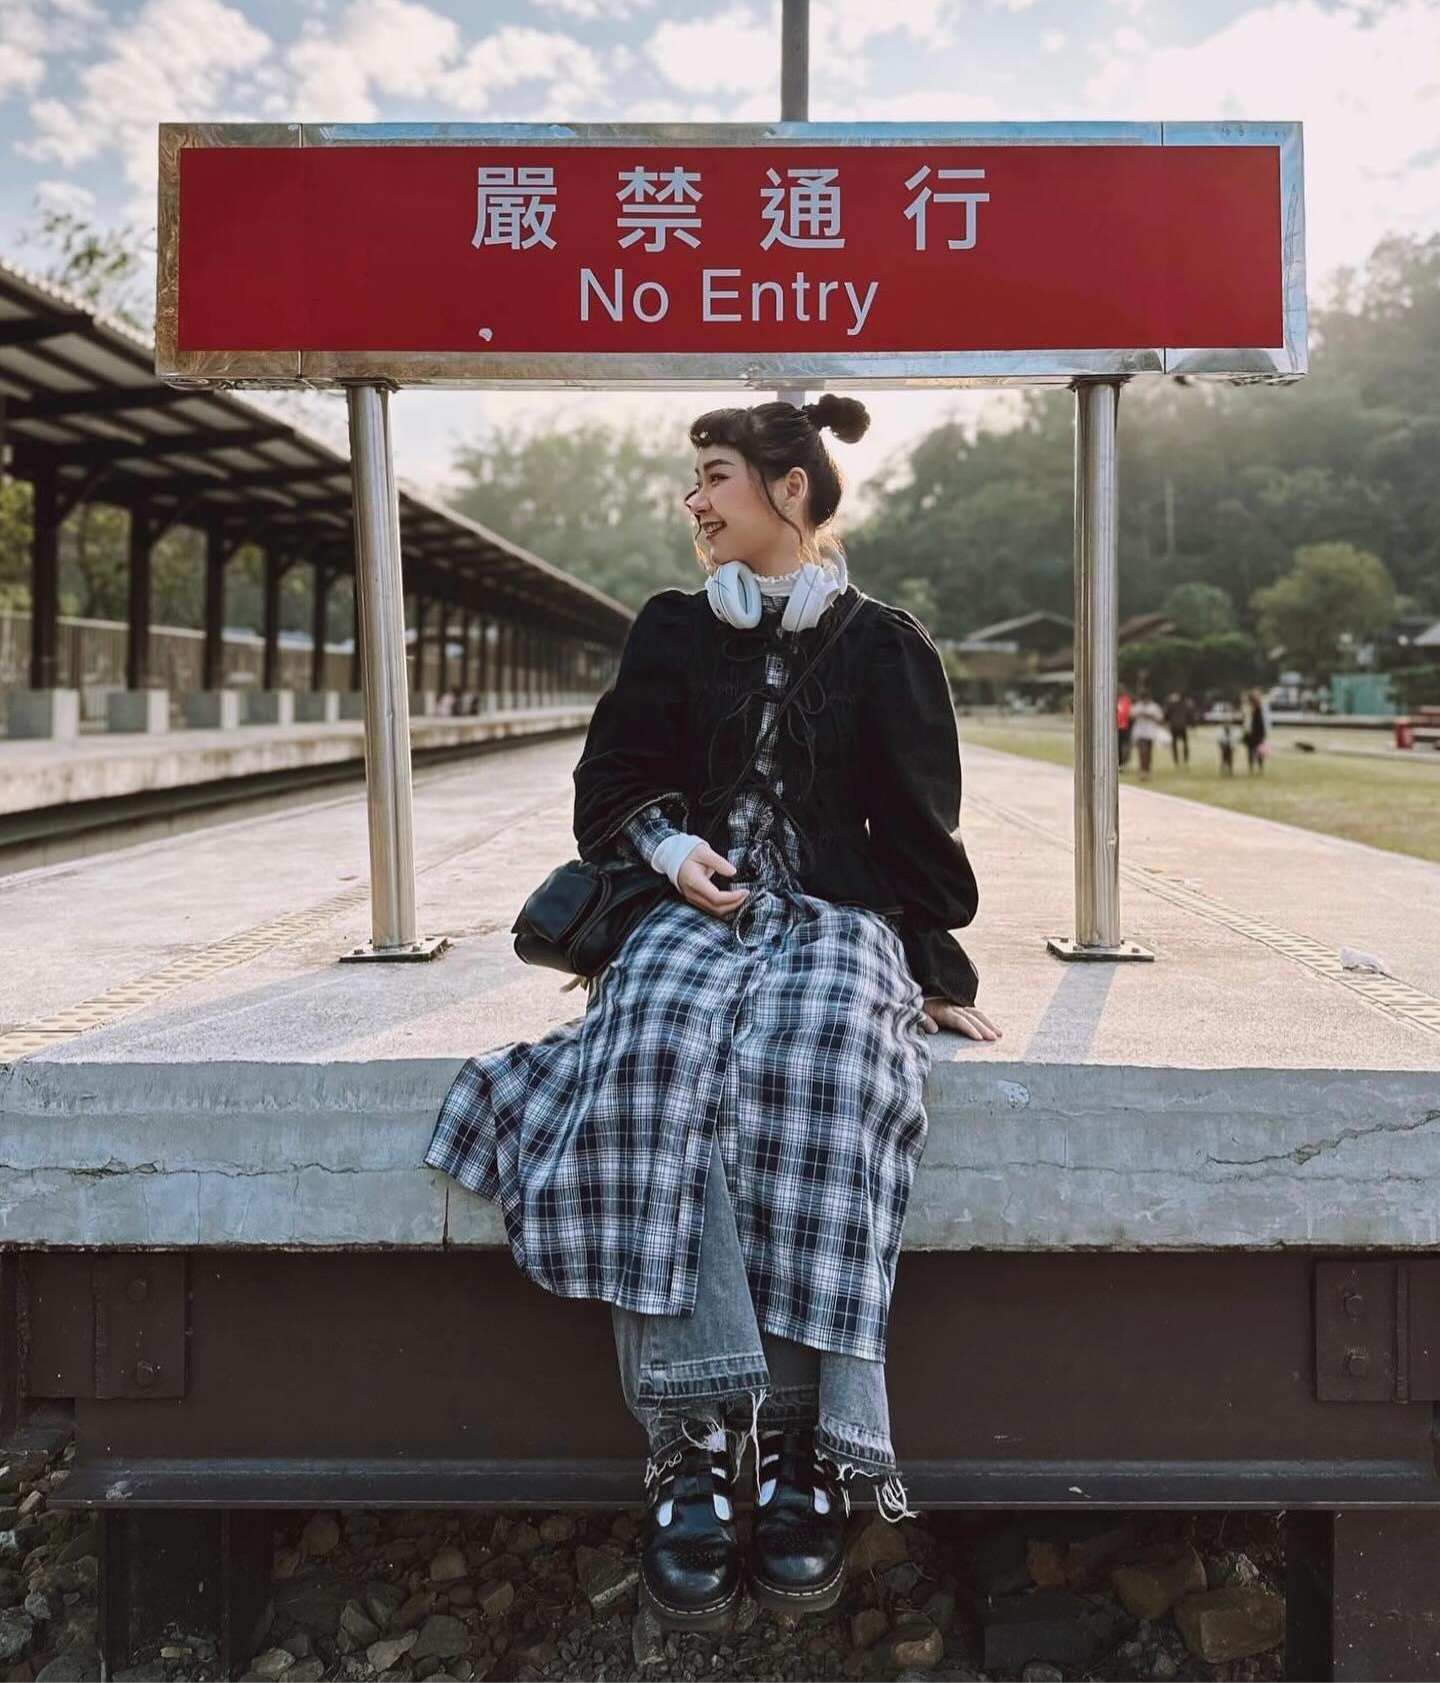 Girl sitting in a train station, smiling and showing her outfit.